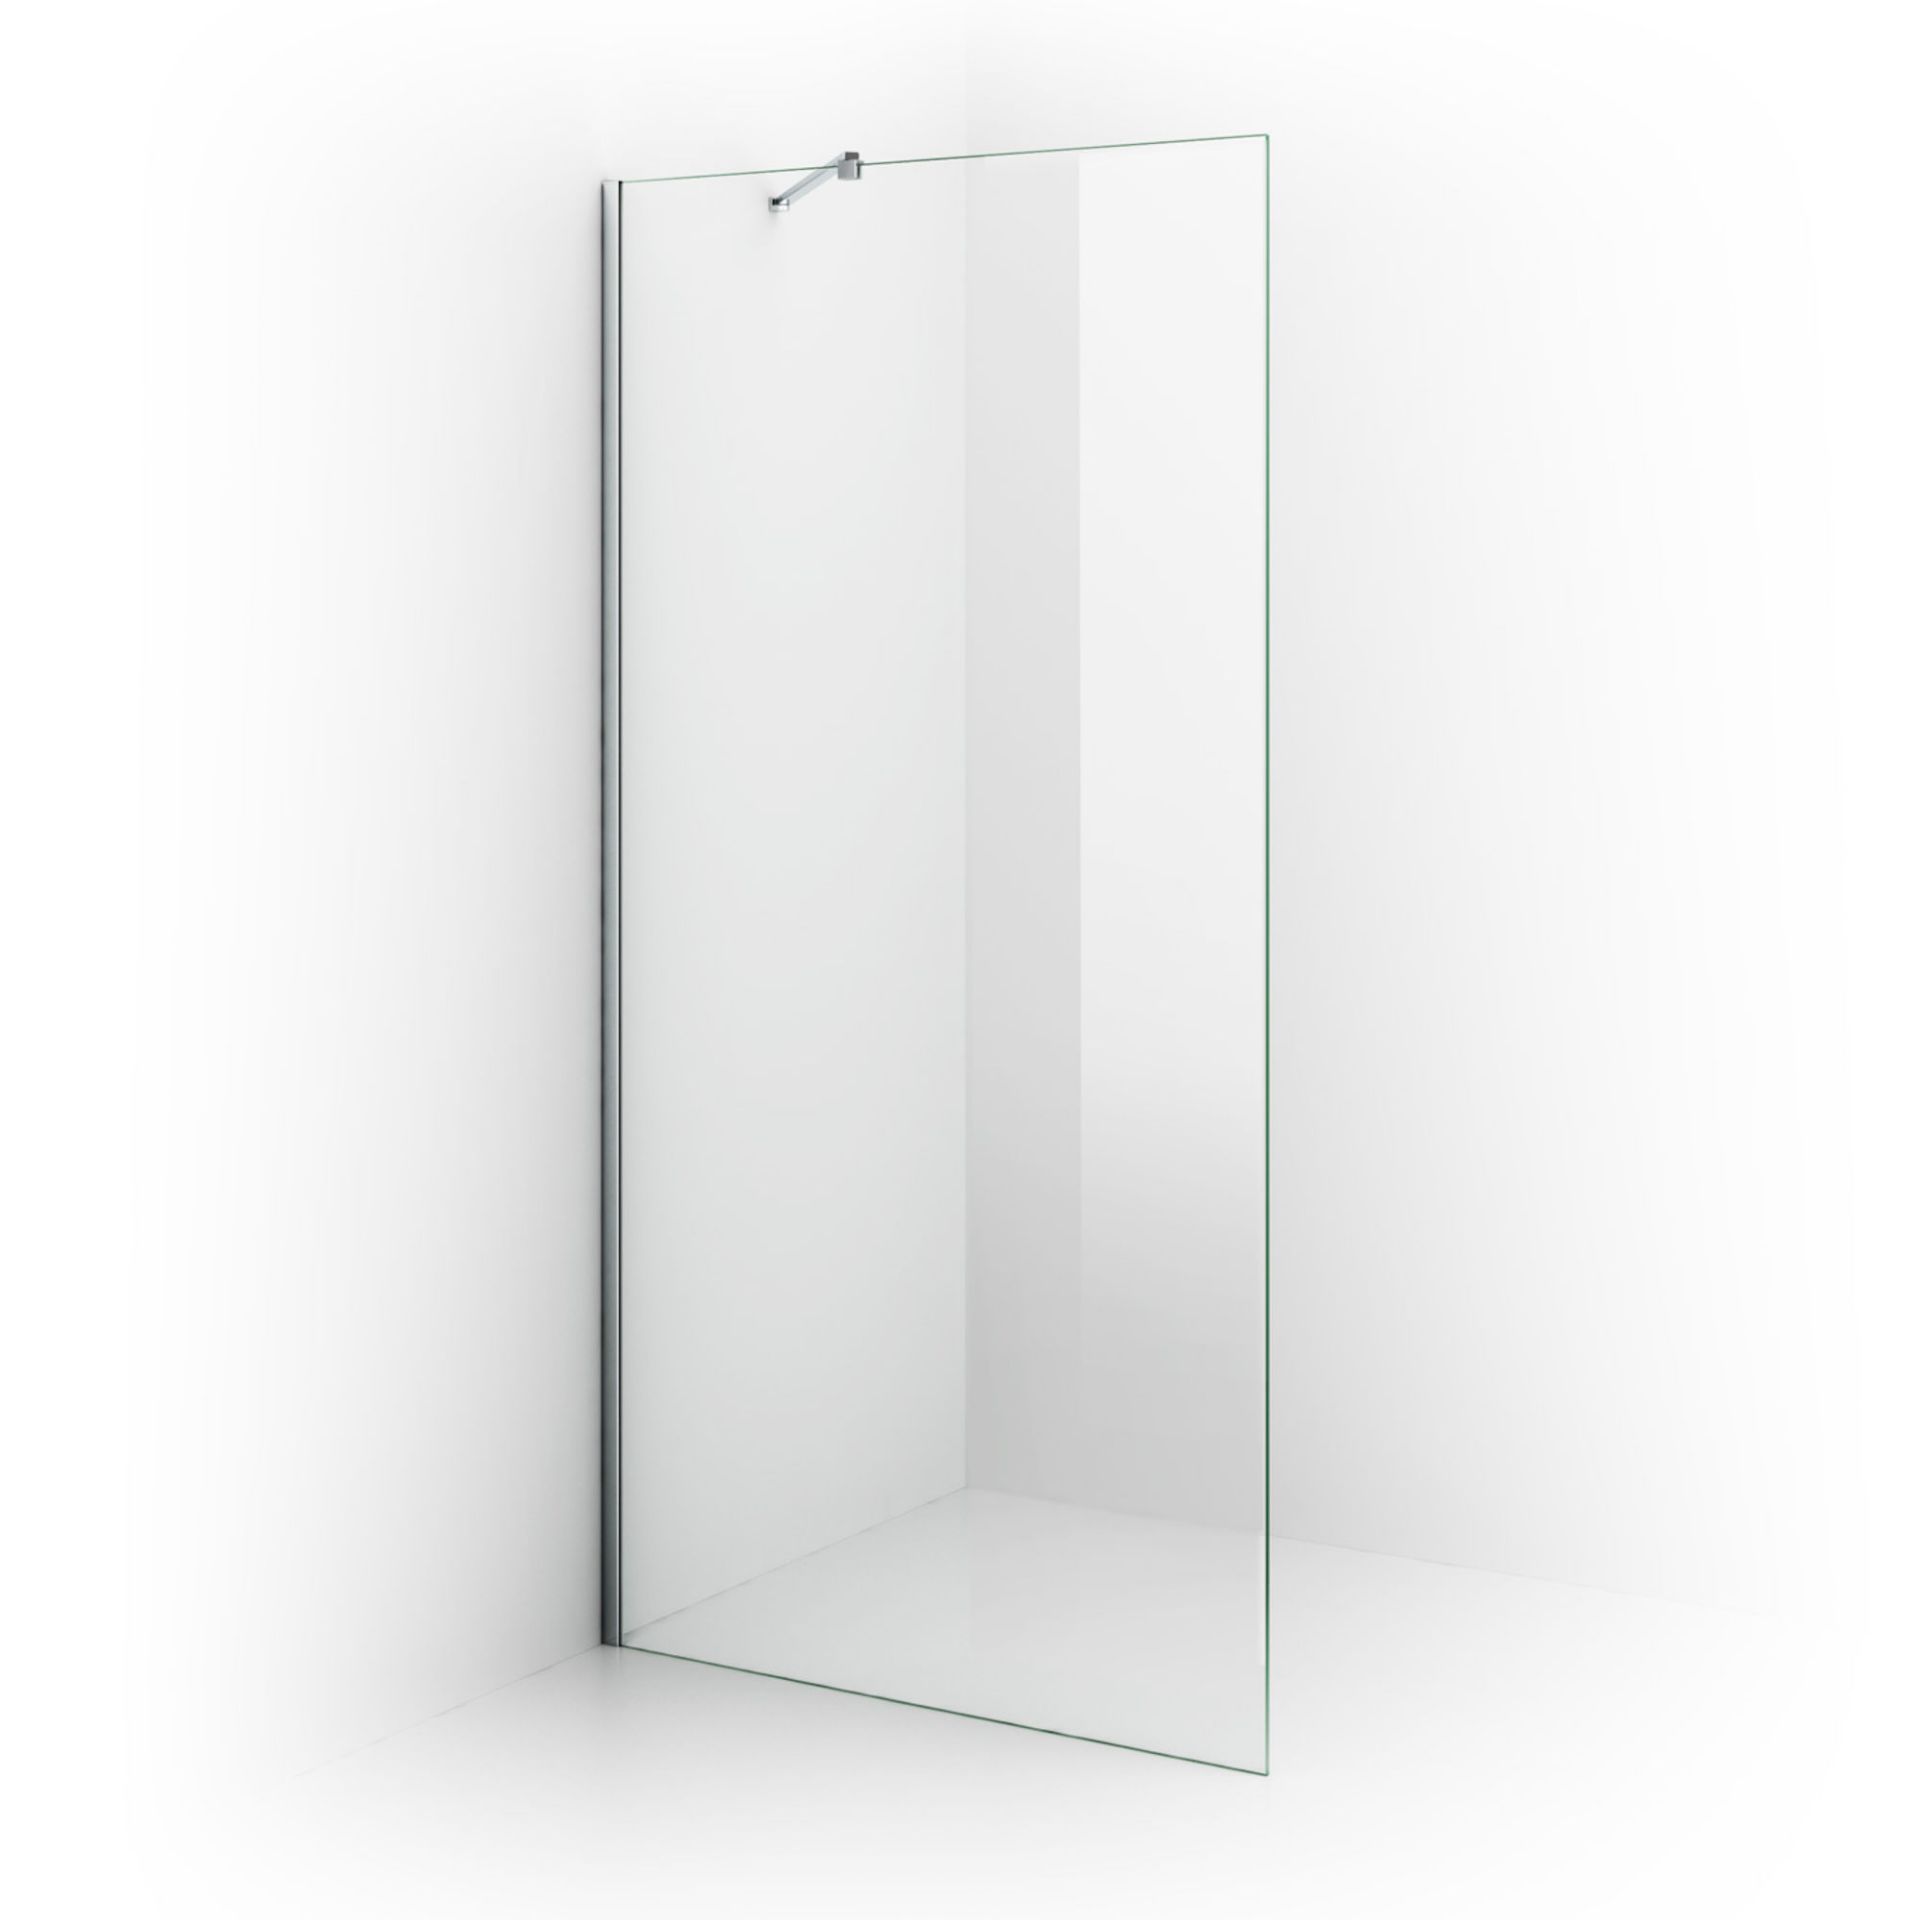 (ED96) 900mm - 8mm - Premium EasyClean Wetroom Panel. RRP £349.99. 8mm EasyClean glass - Our glass - Image 3 of 4